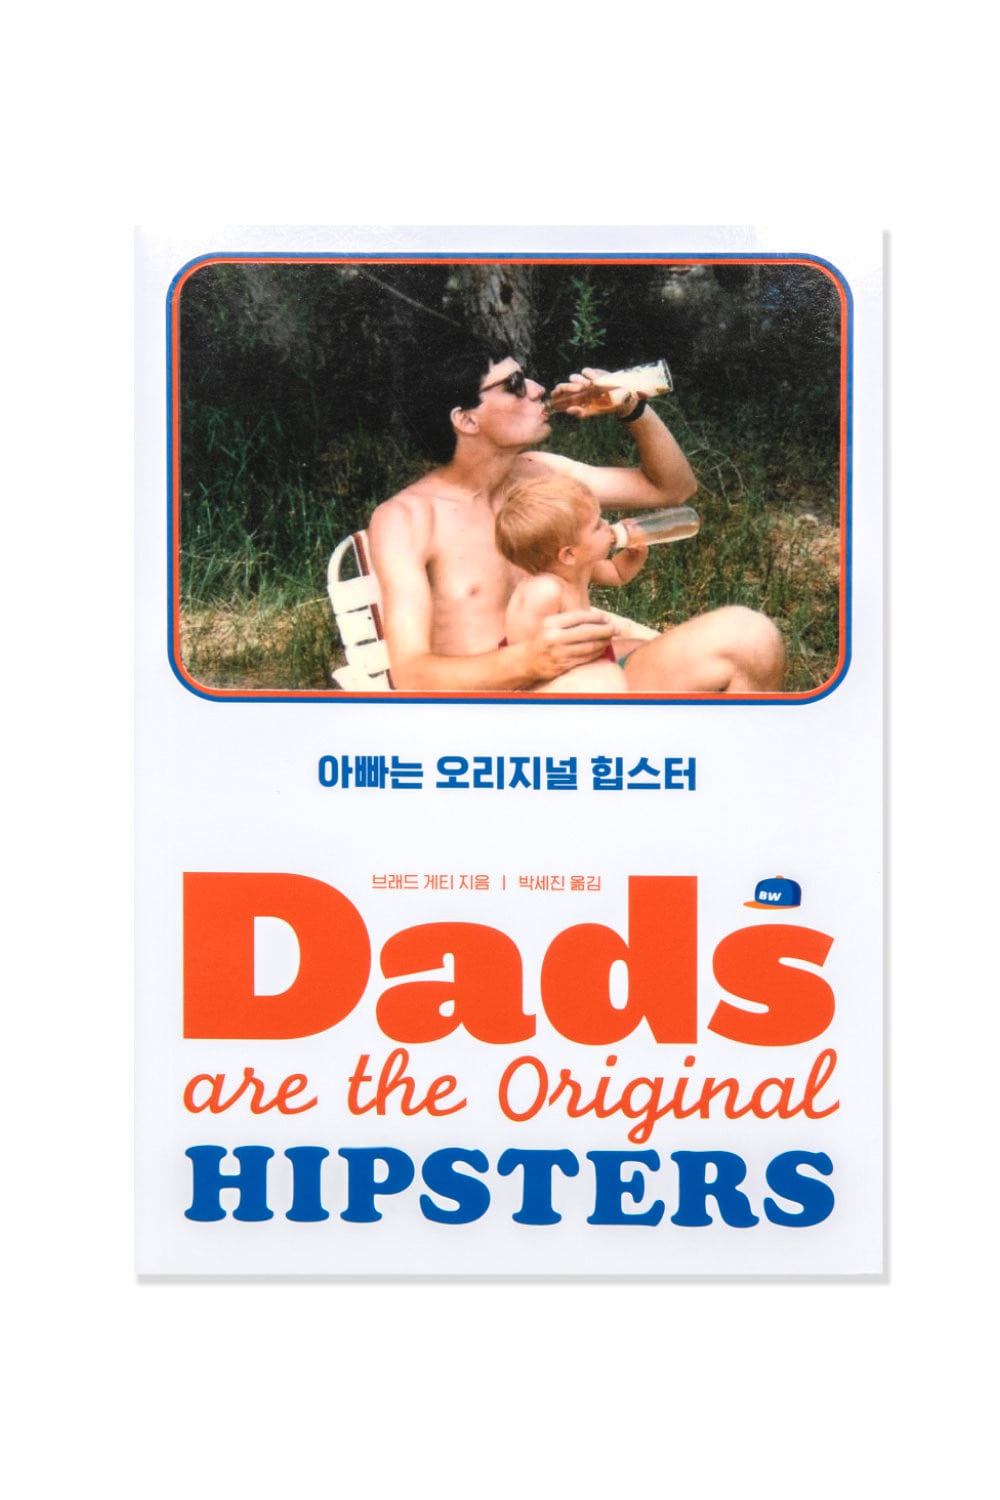 Dads are the Original Hipsters (아빠는 오리지널 힙스터)